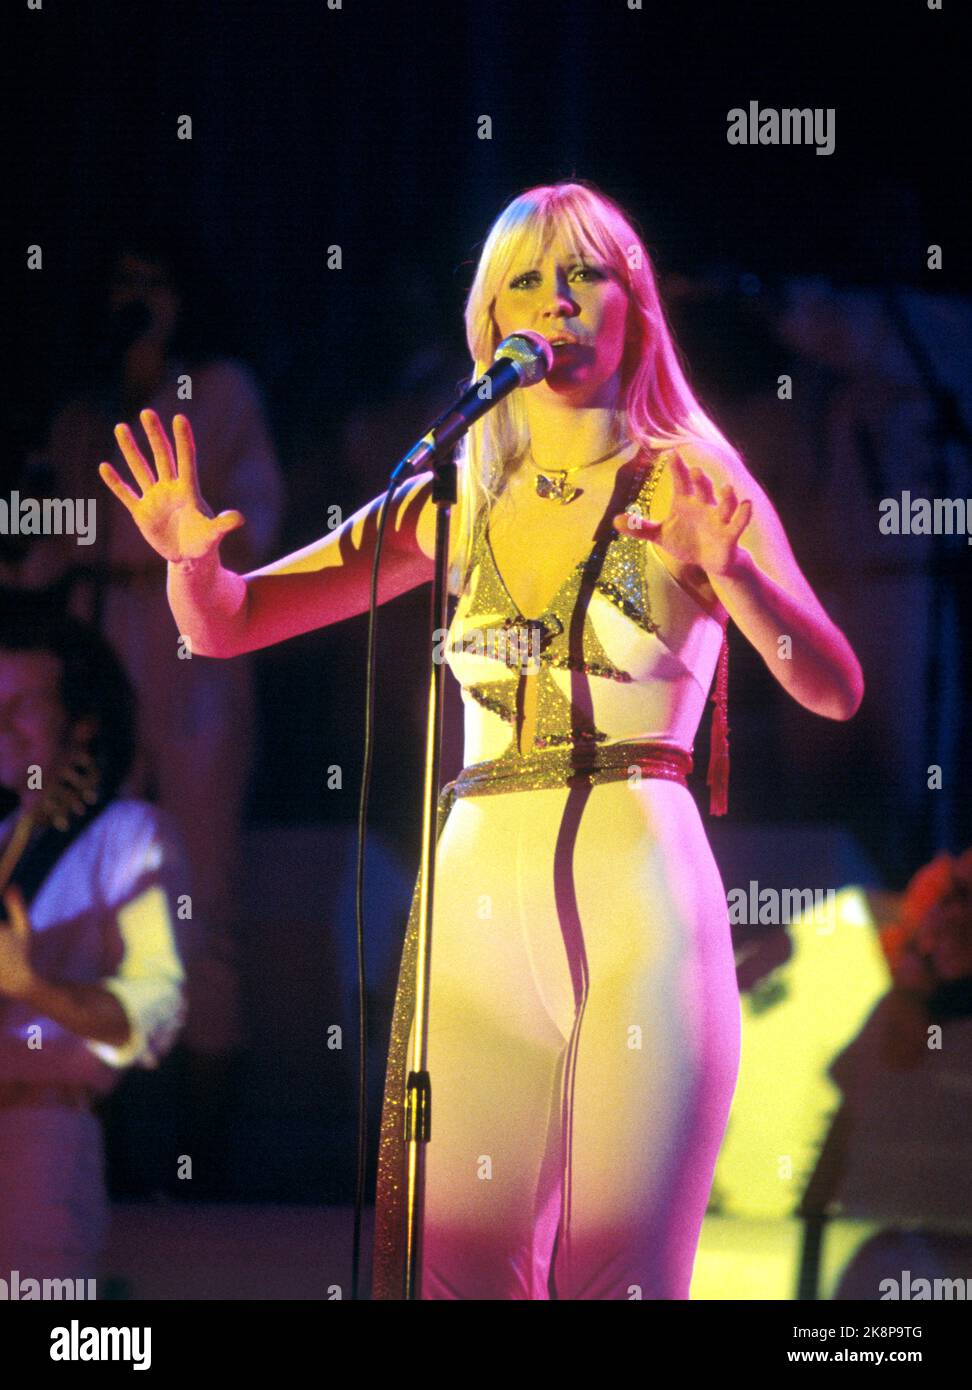 Oslo 1977-01-28: The Swedish pop group ABBA initiates its concert tour with a concert in Ekeberghallen, January 28, 1977. ABBA consists of Anni-Frid Lyngstad (Frida), Agnetha Fältskog, Björn Ulvaeus and Benny Andersson. BIDT: Agnetha Fältskog. Photo: Oddvar Walle Jensen / NTB / NTB Stock Photo